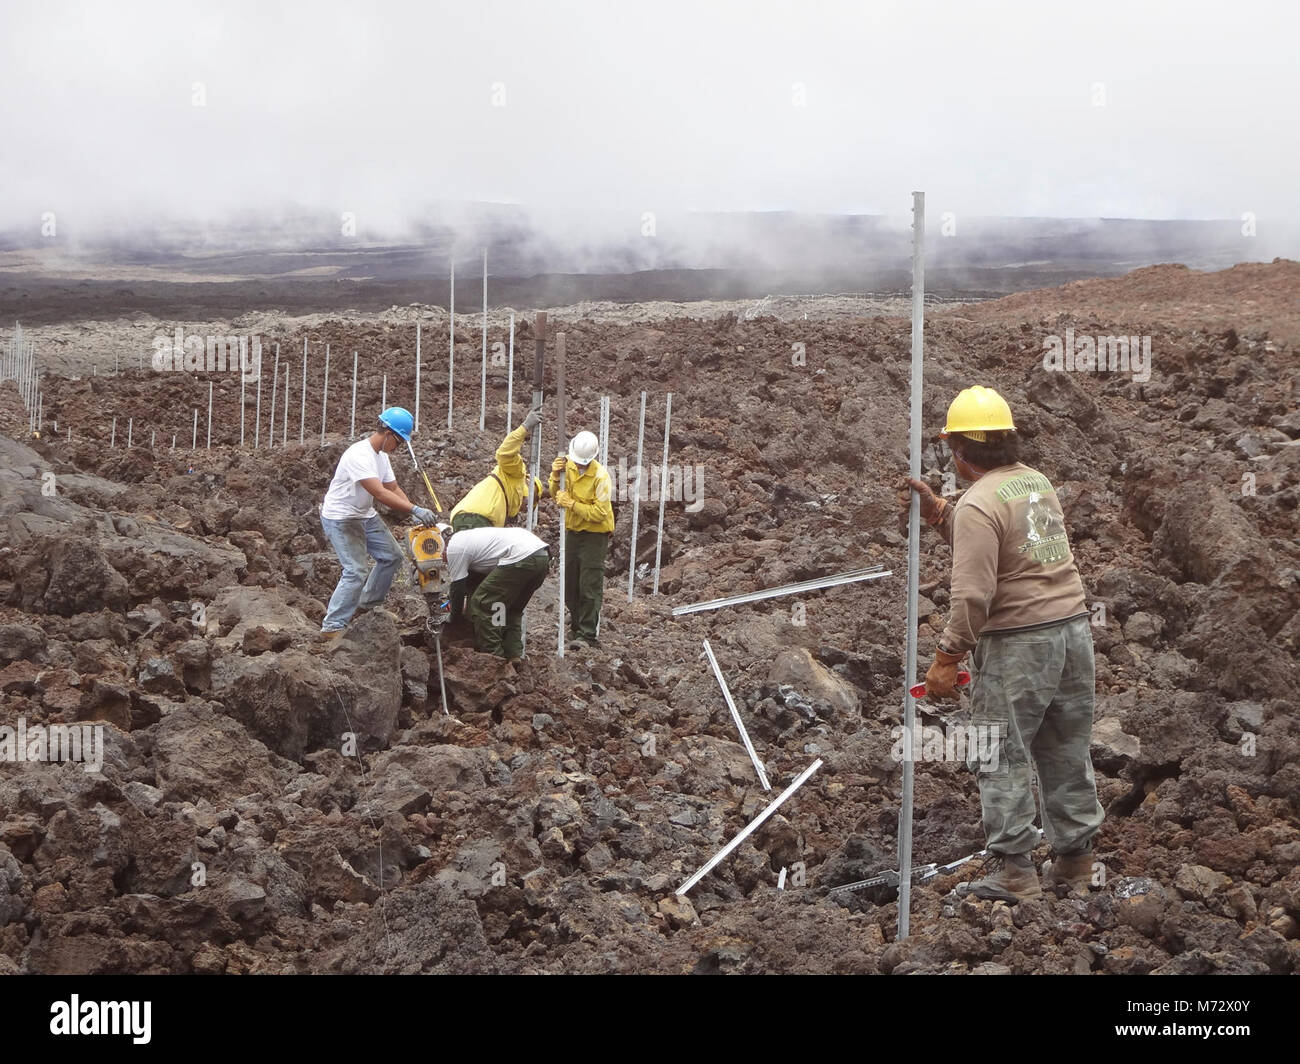 Installing cat proof fence in Hawai‘i Volcanoes National Park . Park staff install the cat-proof fence in rough and rugged high-elevation lava fields on the slopes of Mauna Loa. The five-mile-long fence protects more than 600 acres of Hawaiian petrel habitat, and could be the longest of its kind in the United States. Stock Photo